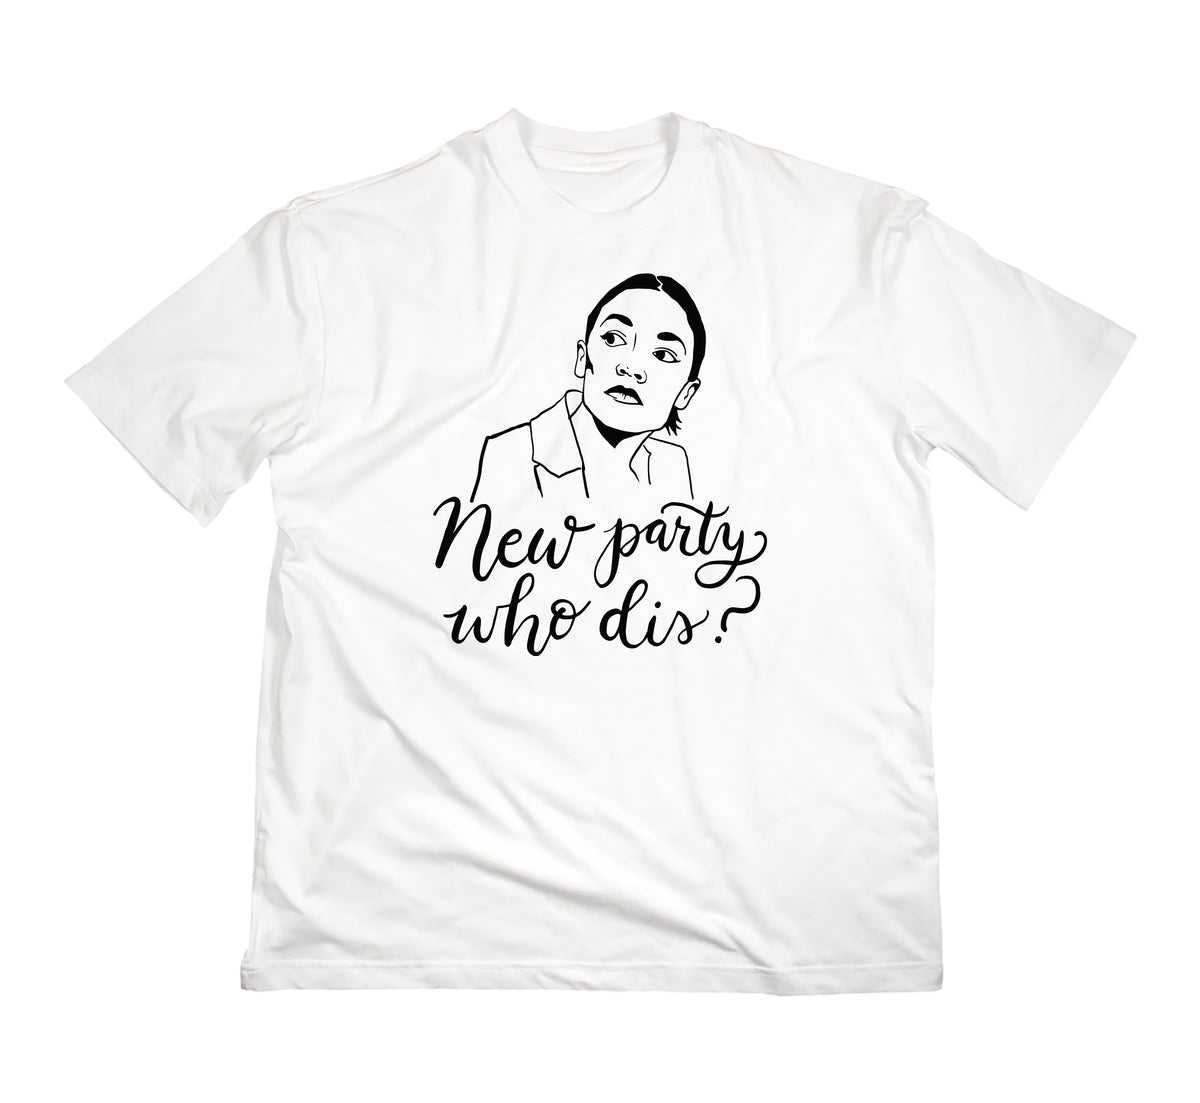 New party, who dis? T-Shirt